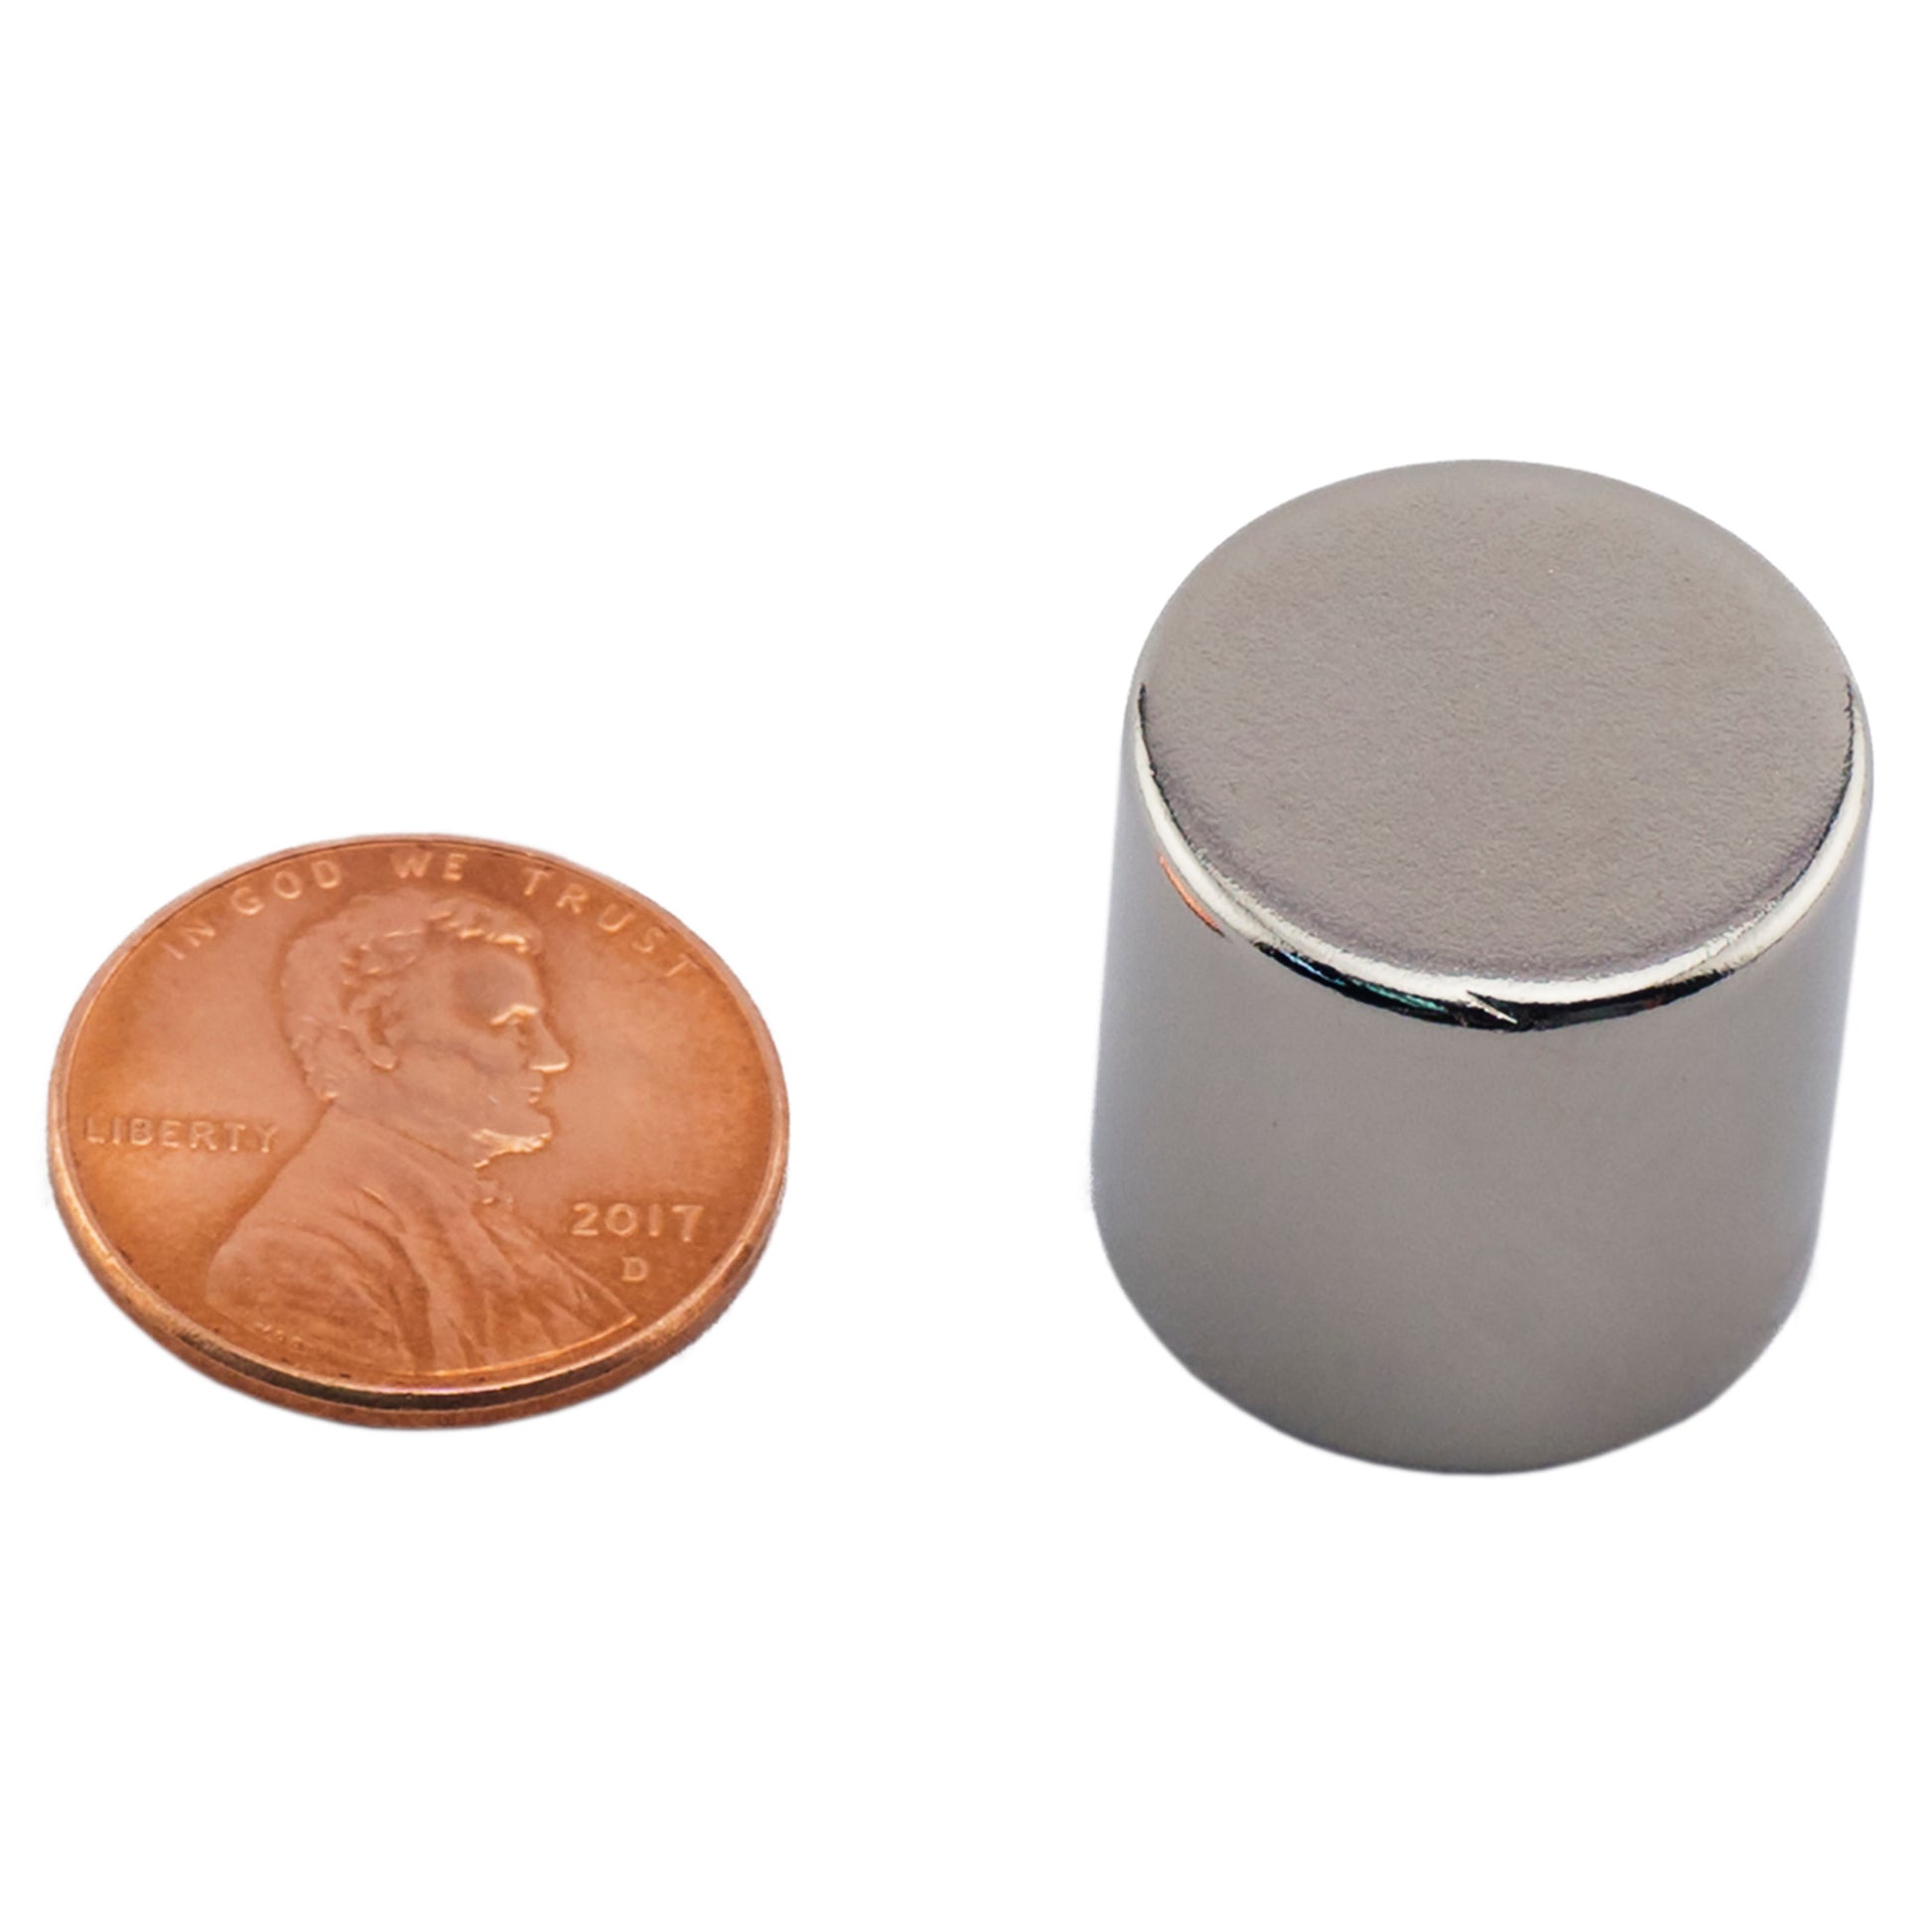 Load image into Gallery viewer, ND007528N Neodymium Disc Magnet - Compared to Penny for Size Reference